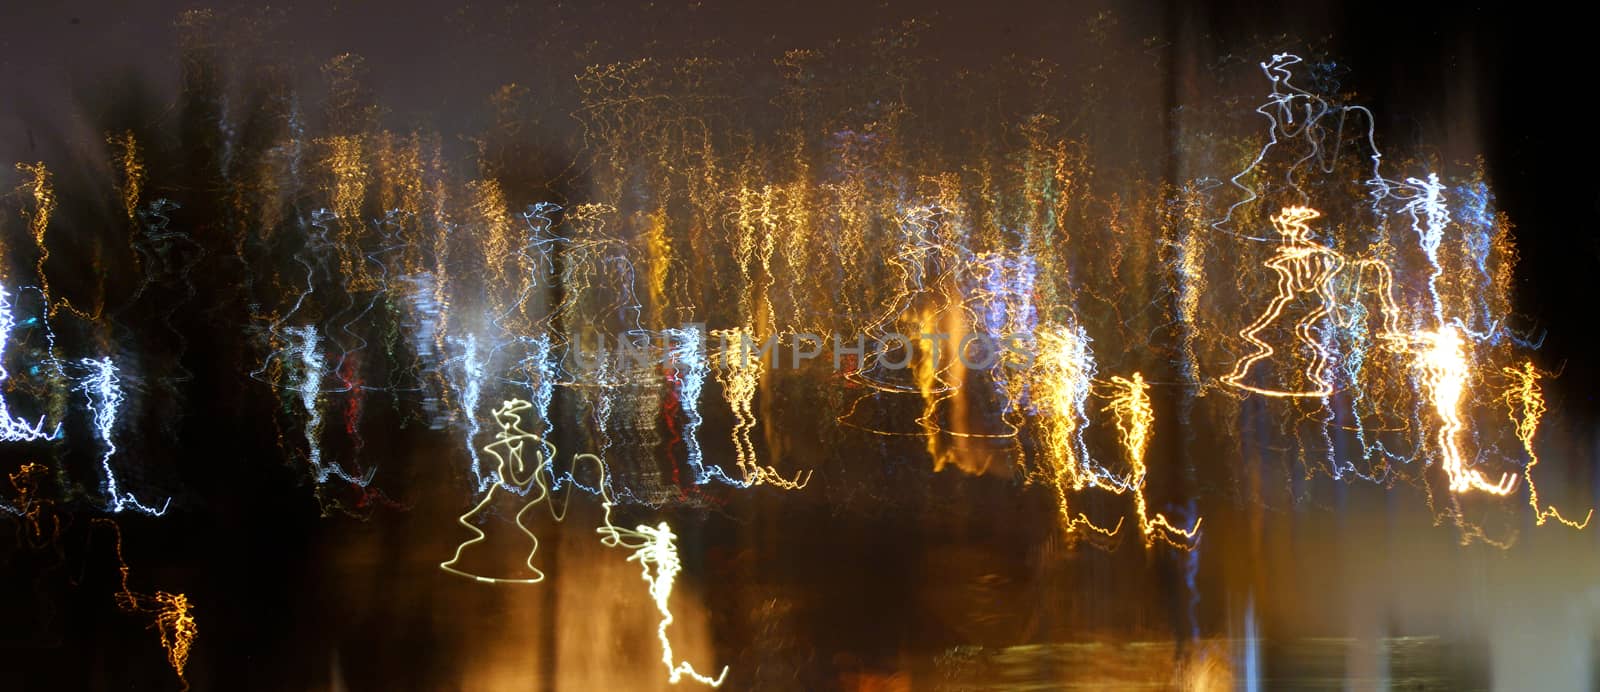 motion night lights abstract, city traffic trails effect shoot from window car, fast driving movement, by geogif